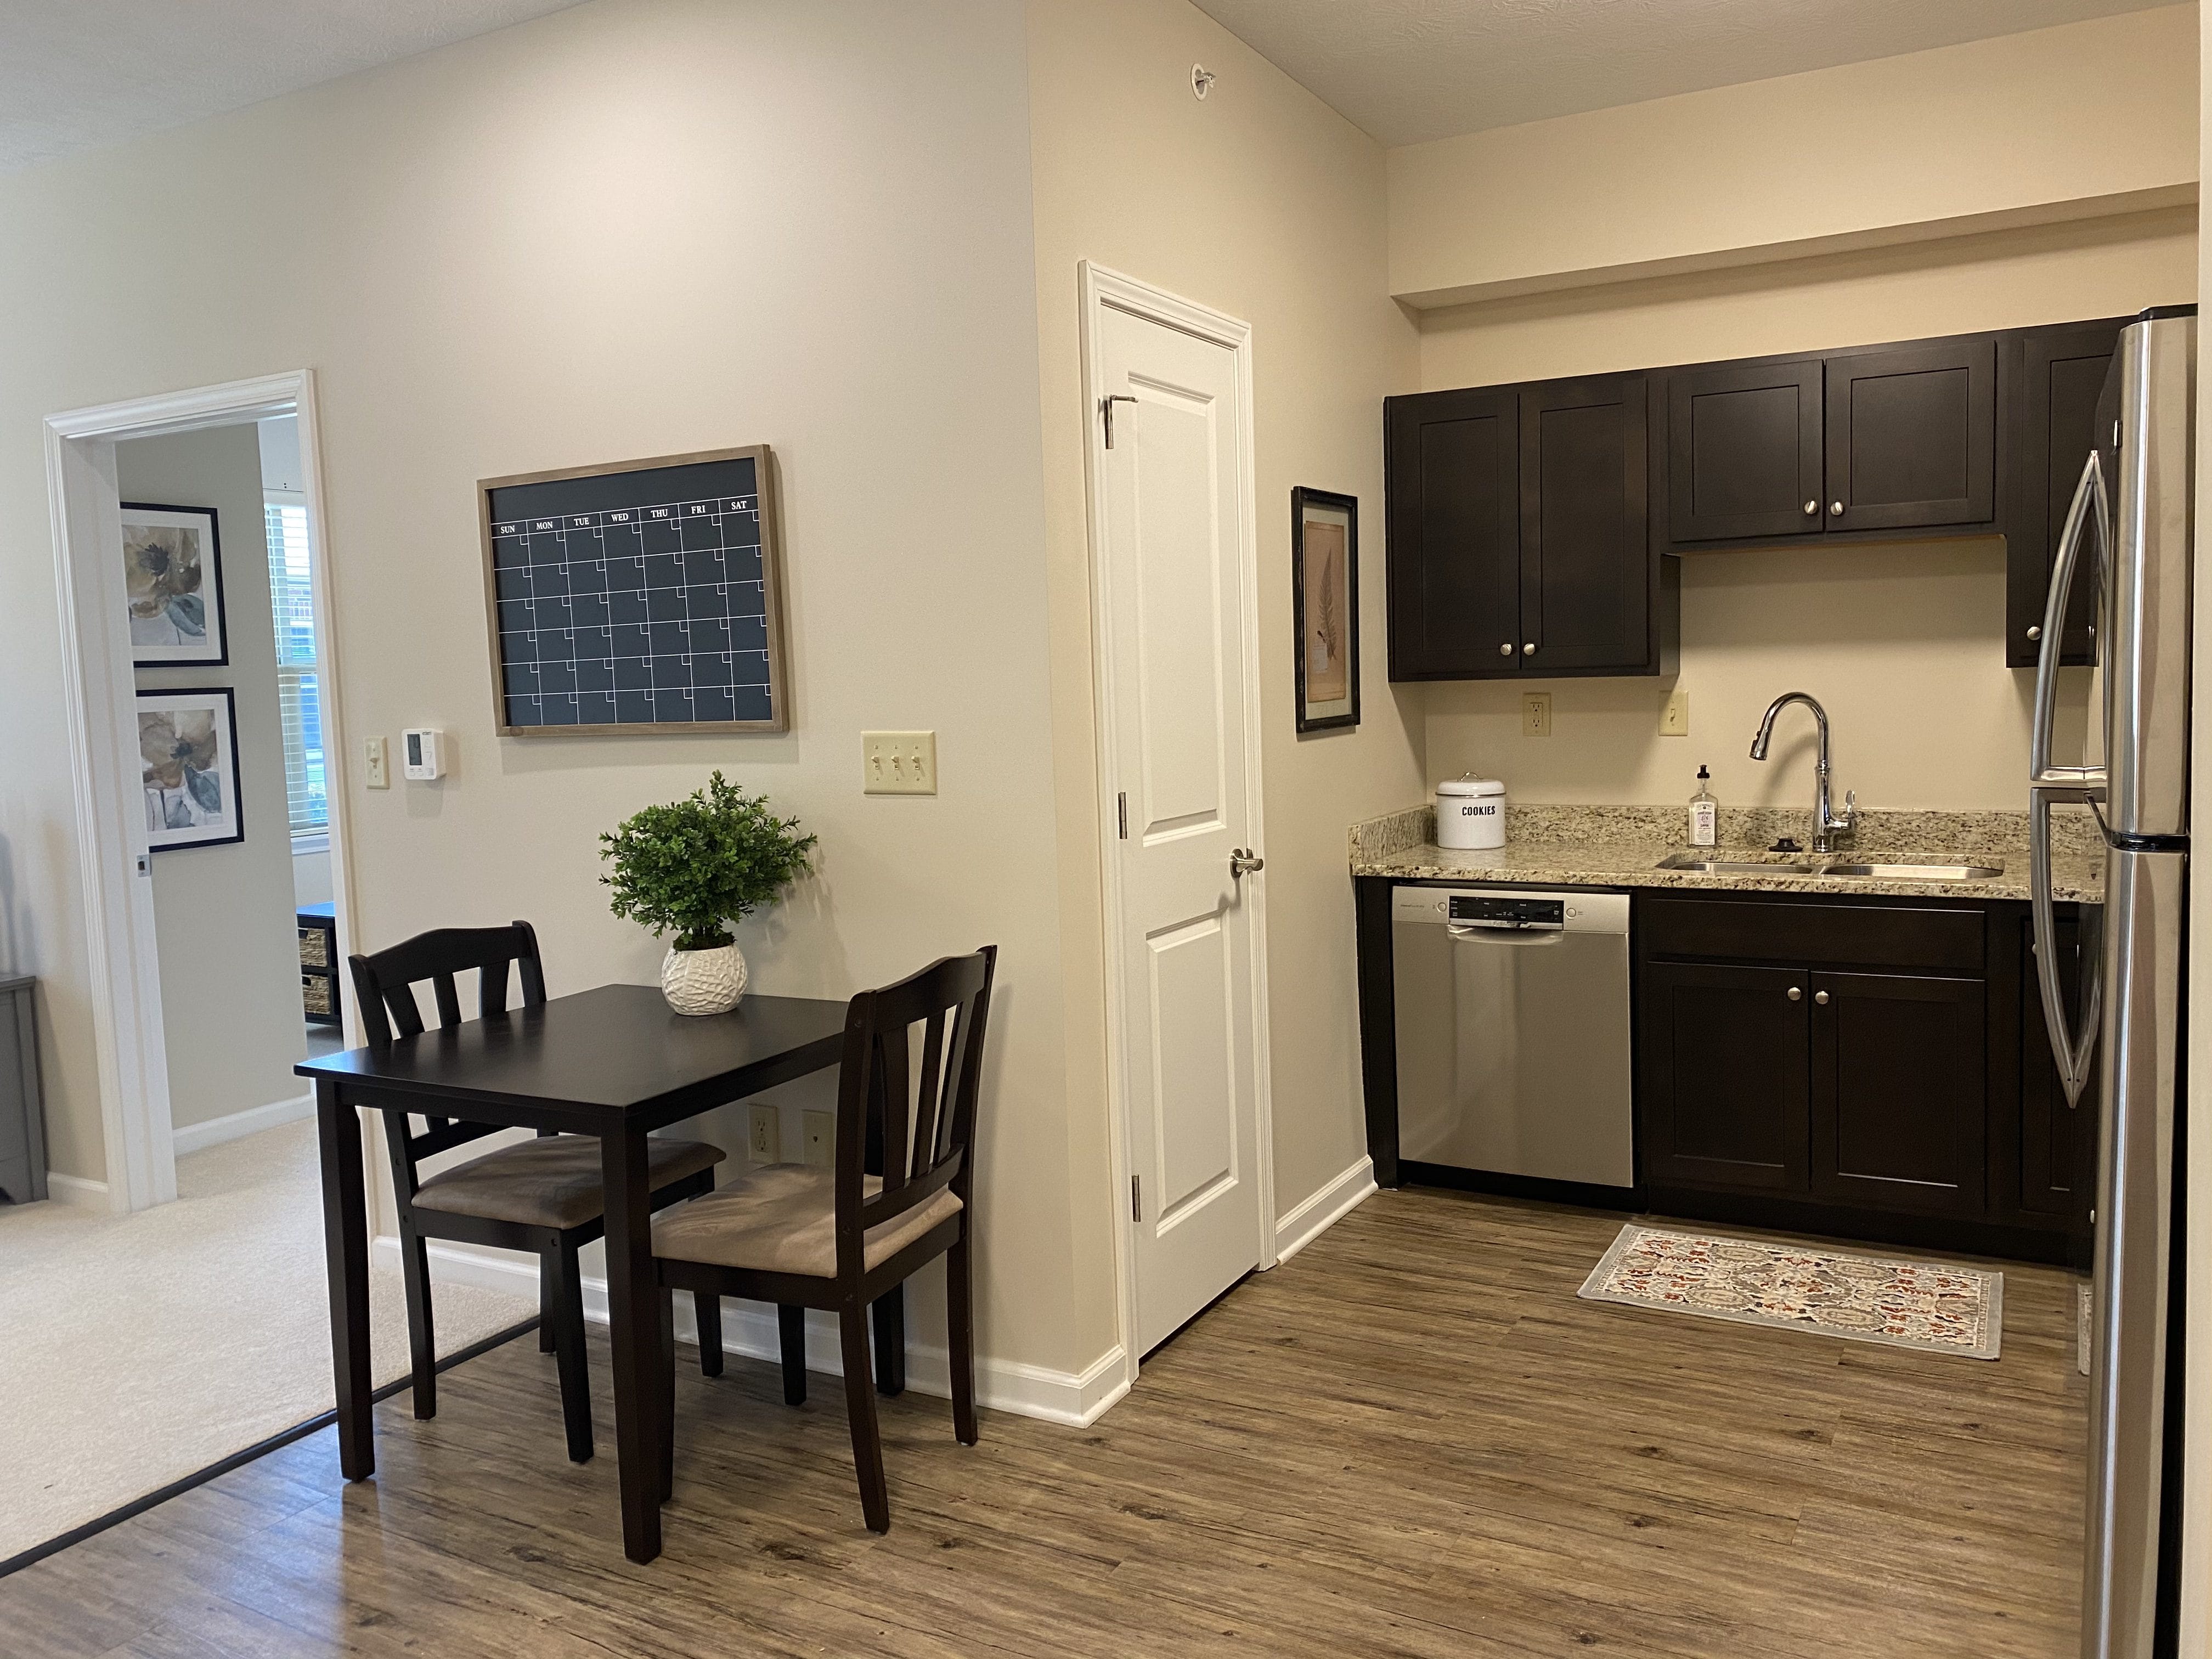 <span  class="uc_style_uc_tiles_grid_image_elementor_uc_items_attribute_title" style="color:#000000;">Kitchen and seating area in Aster Place Independent Living Apartments. </span>